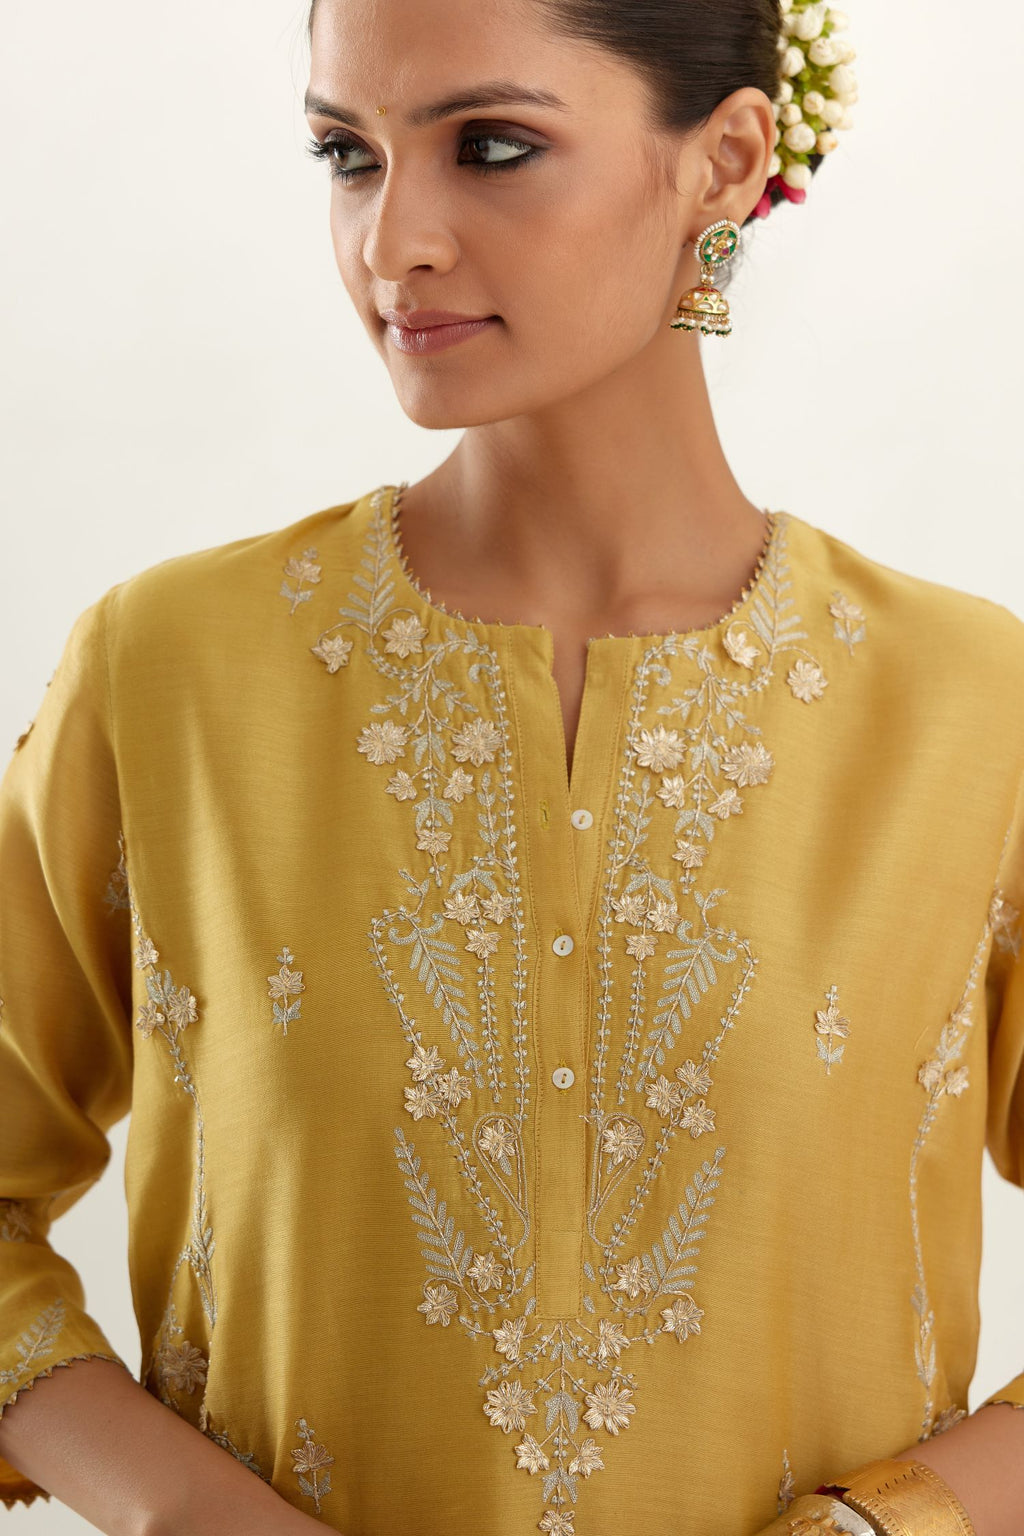 Yellow silk chanderi straight kurta set with button placket neckline, highlighted with all-over gold gota and zari embroidery.